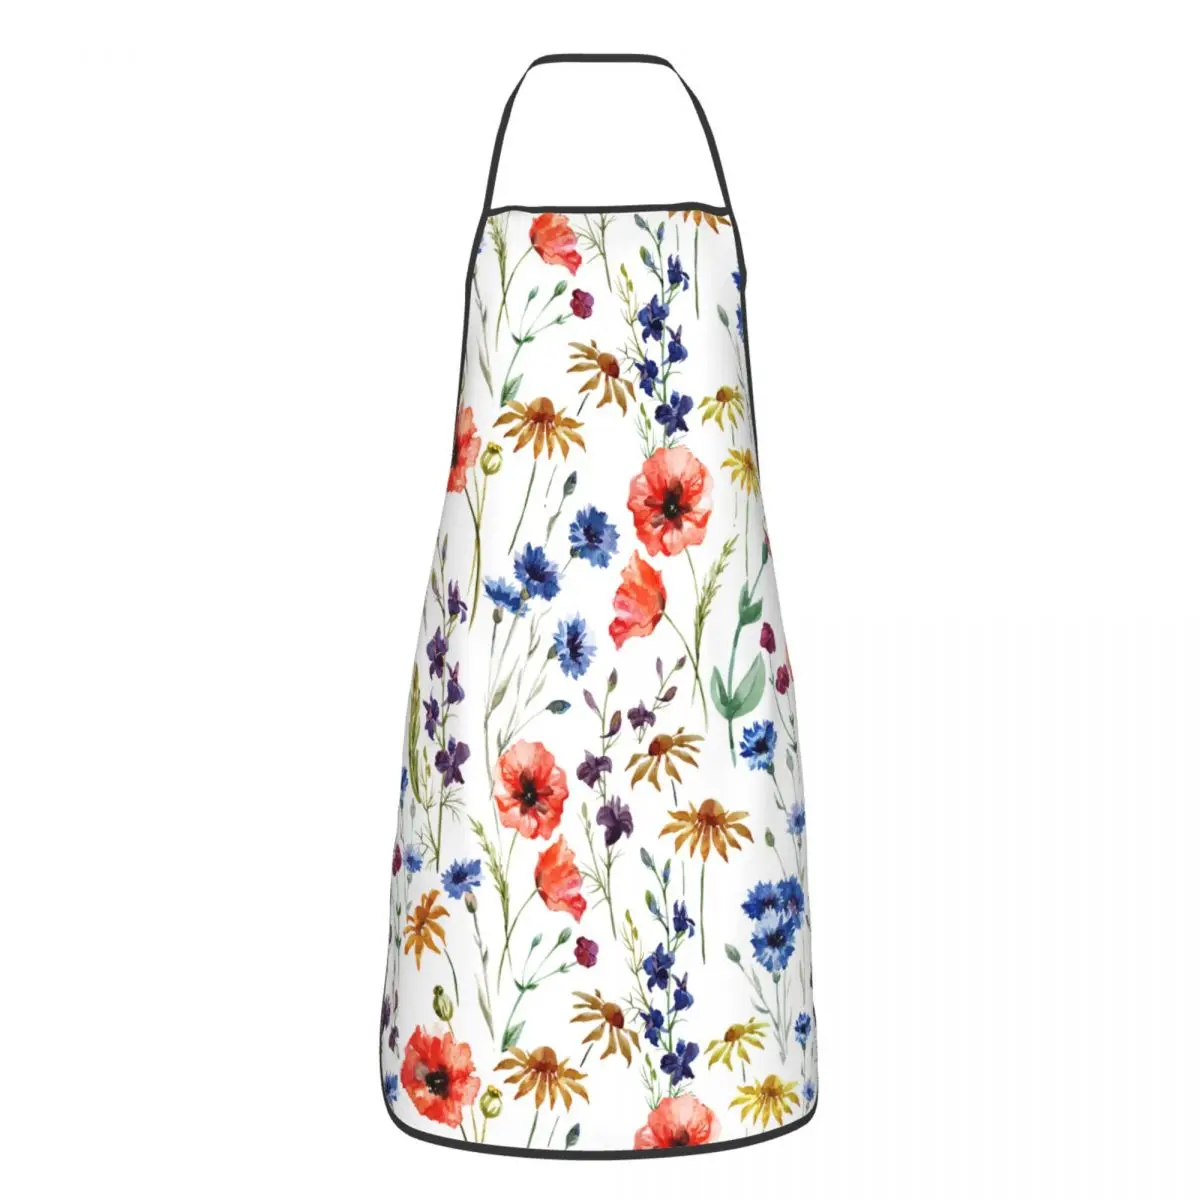 

Retor Wildflowers Polyester Aprons Beautiful 52*72cm Kitchen Grill Bib Tablier Cooking Home Cleaning Pinafores for Chef Barista